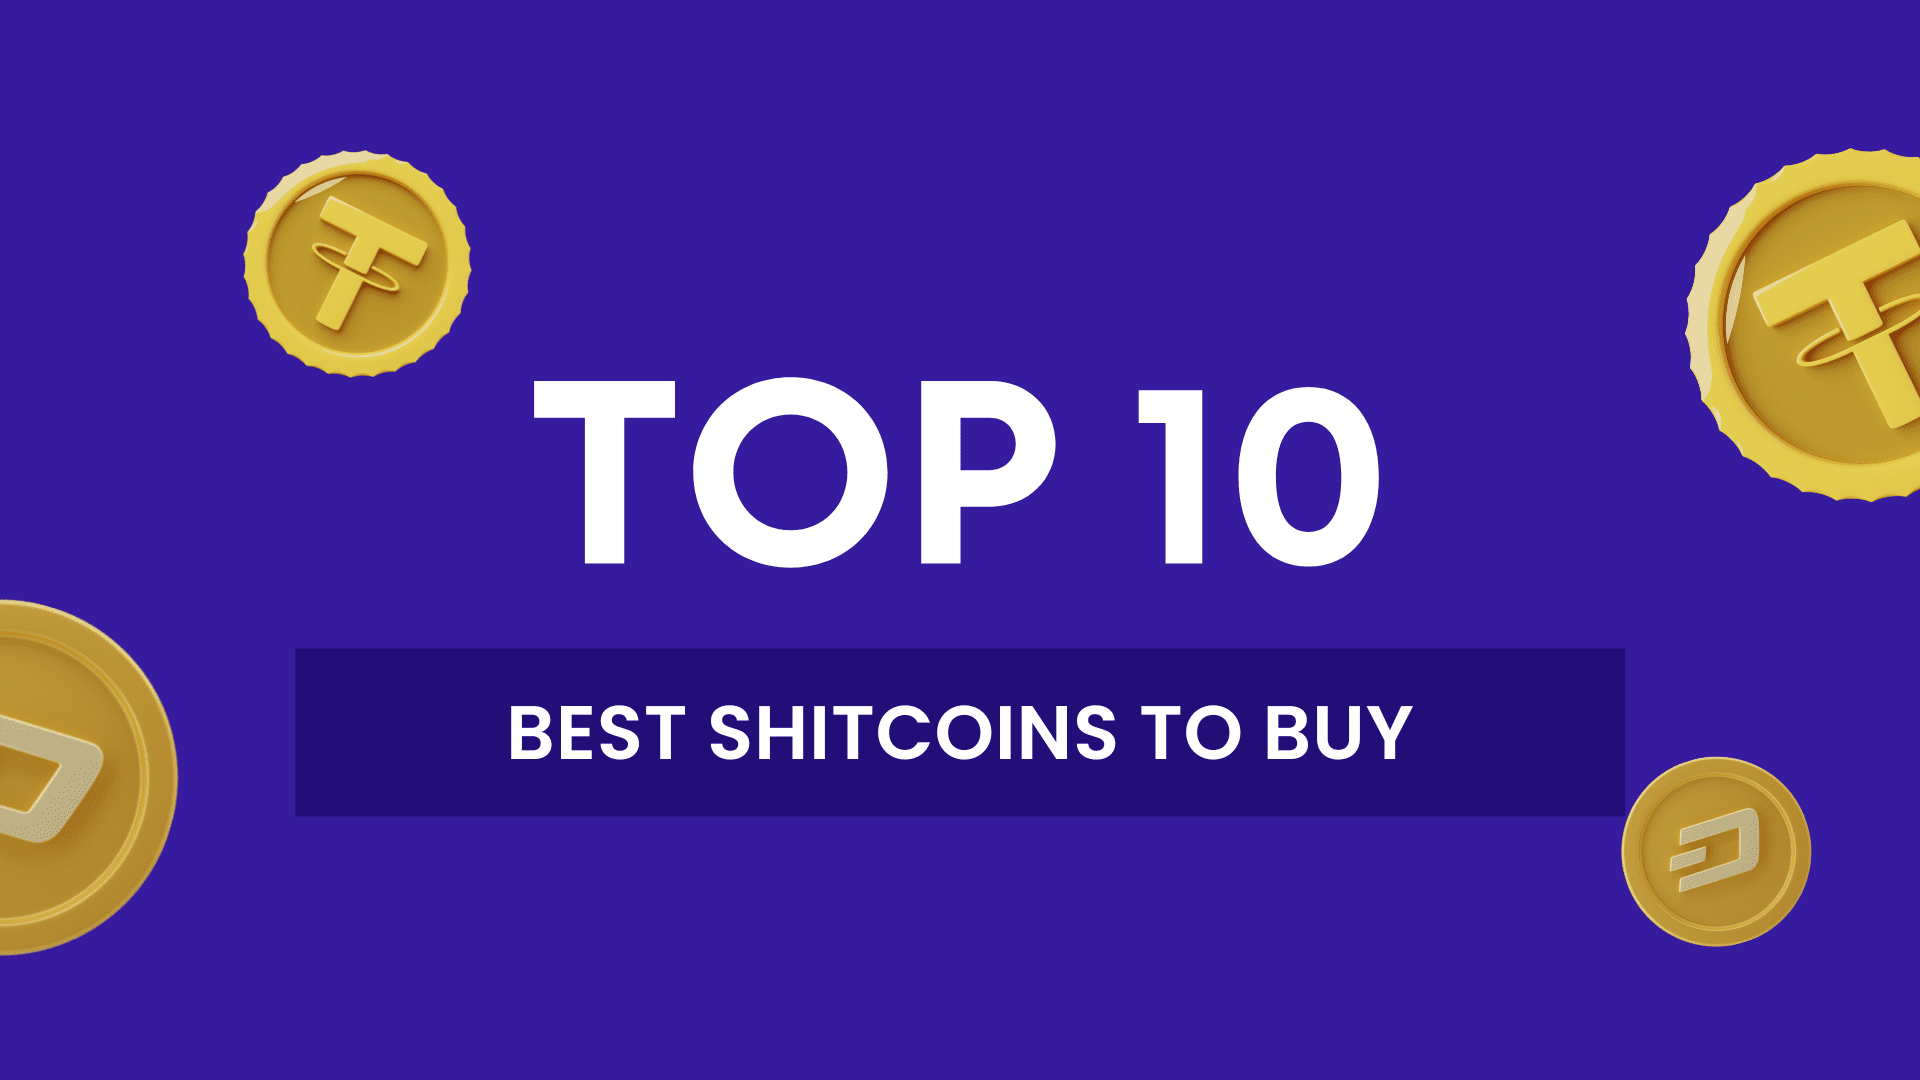 Top 10 Best Shitcoin To Buy - Featured Image